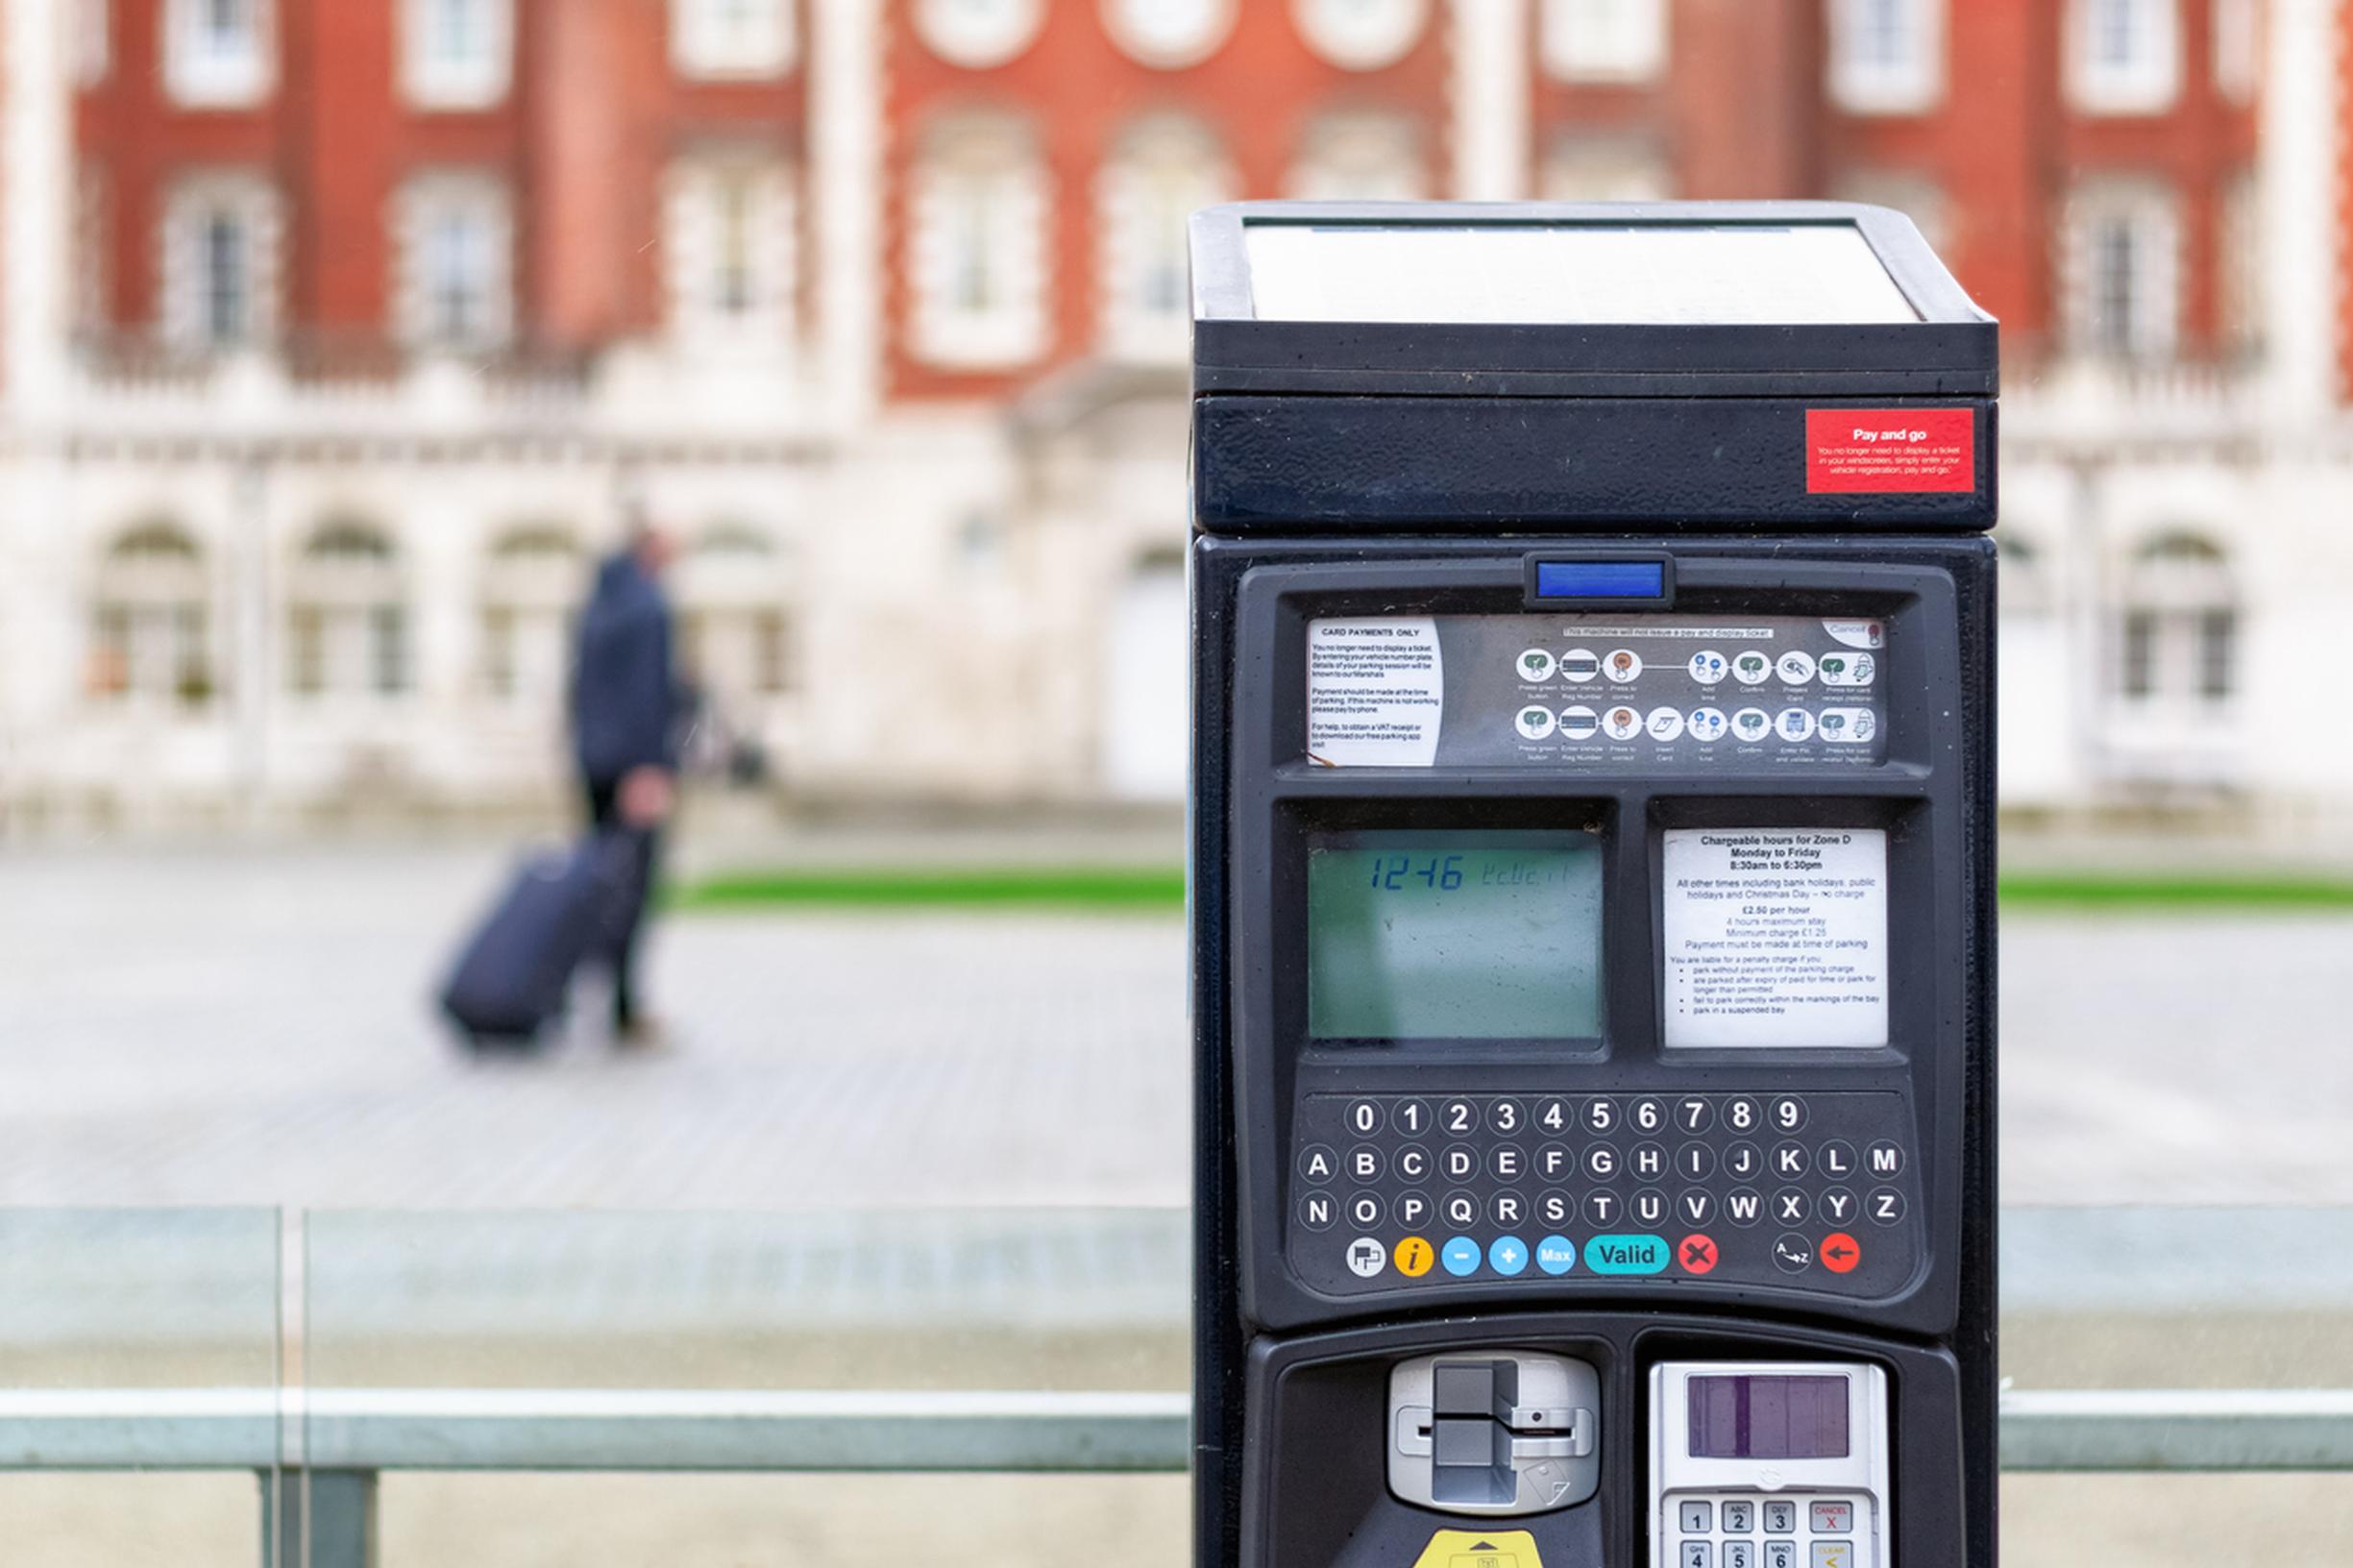 Coin accepting P&D machines are starting to vanish from some high streets